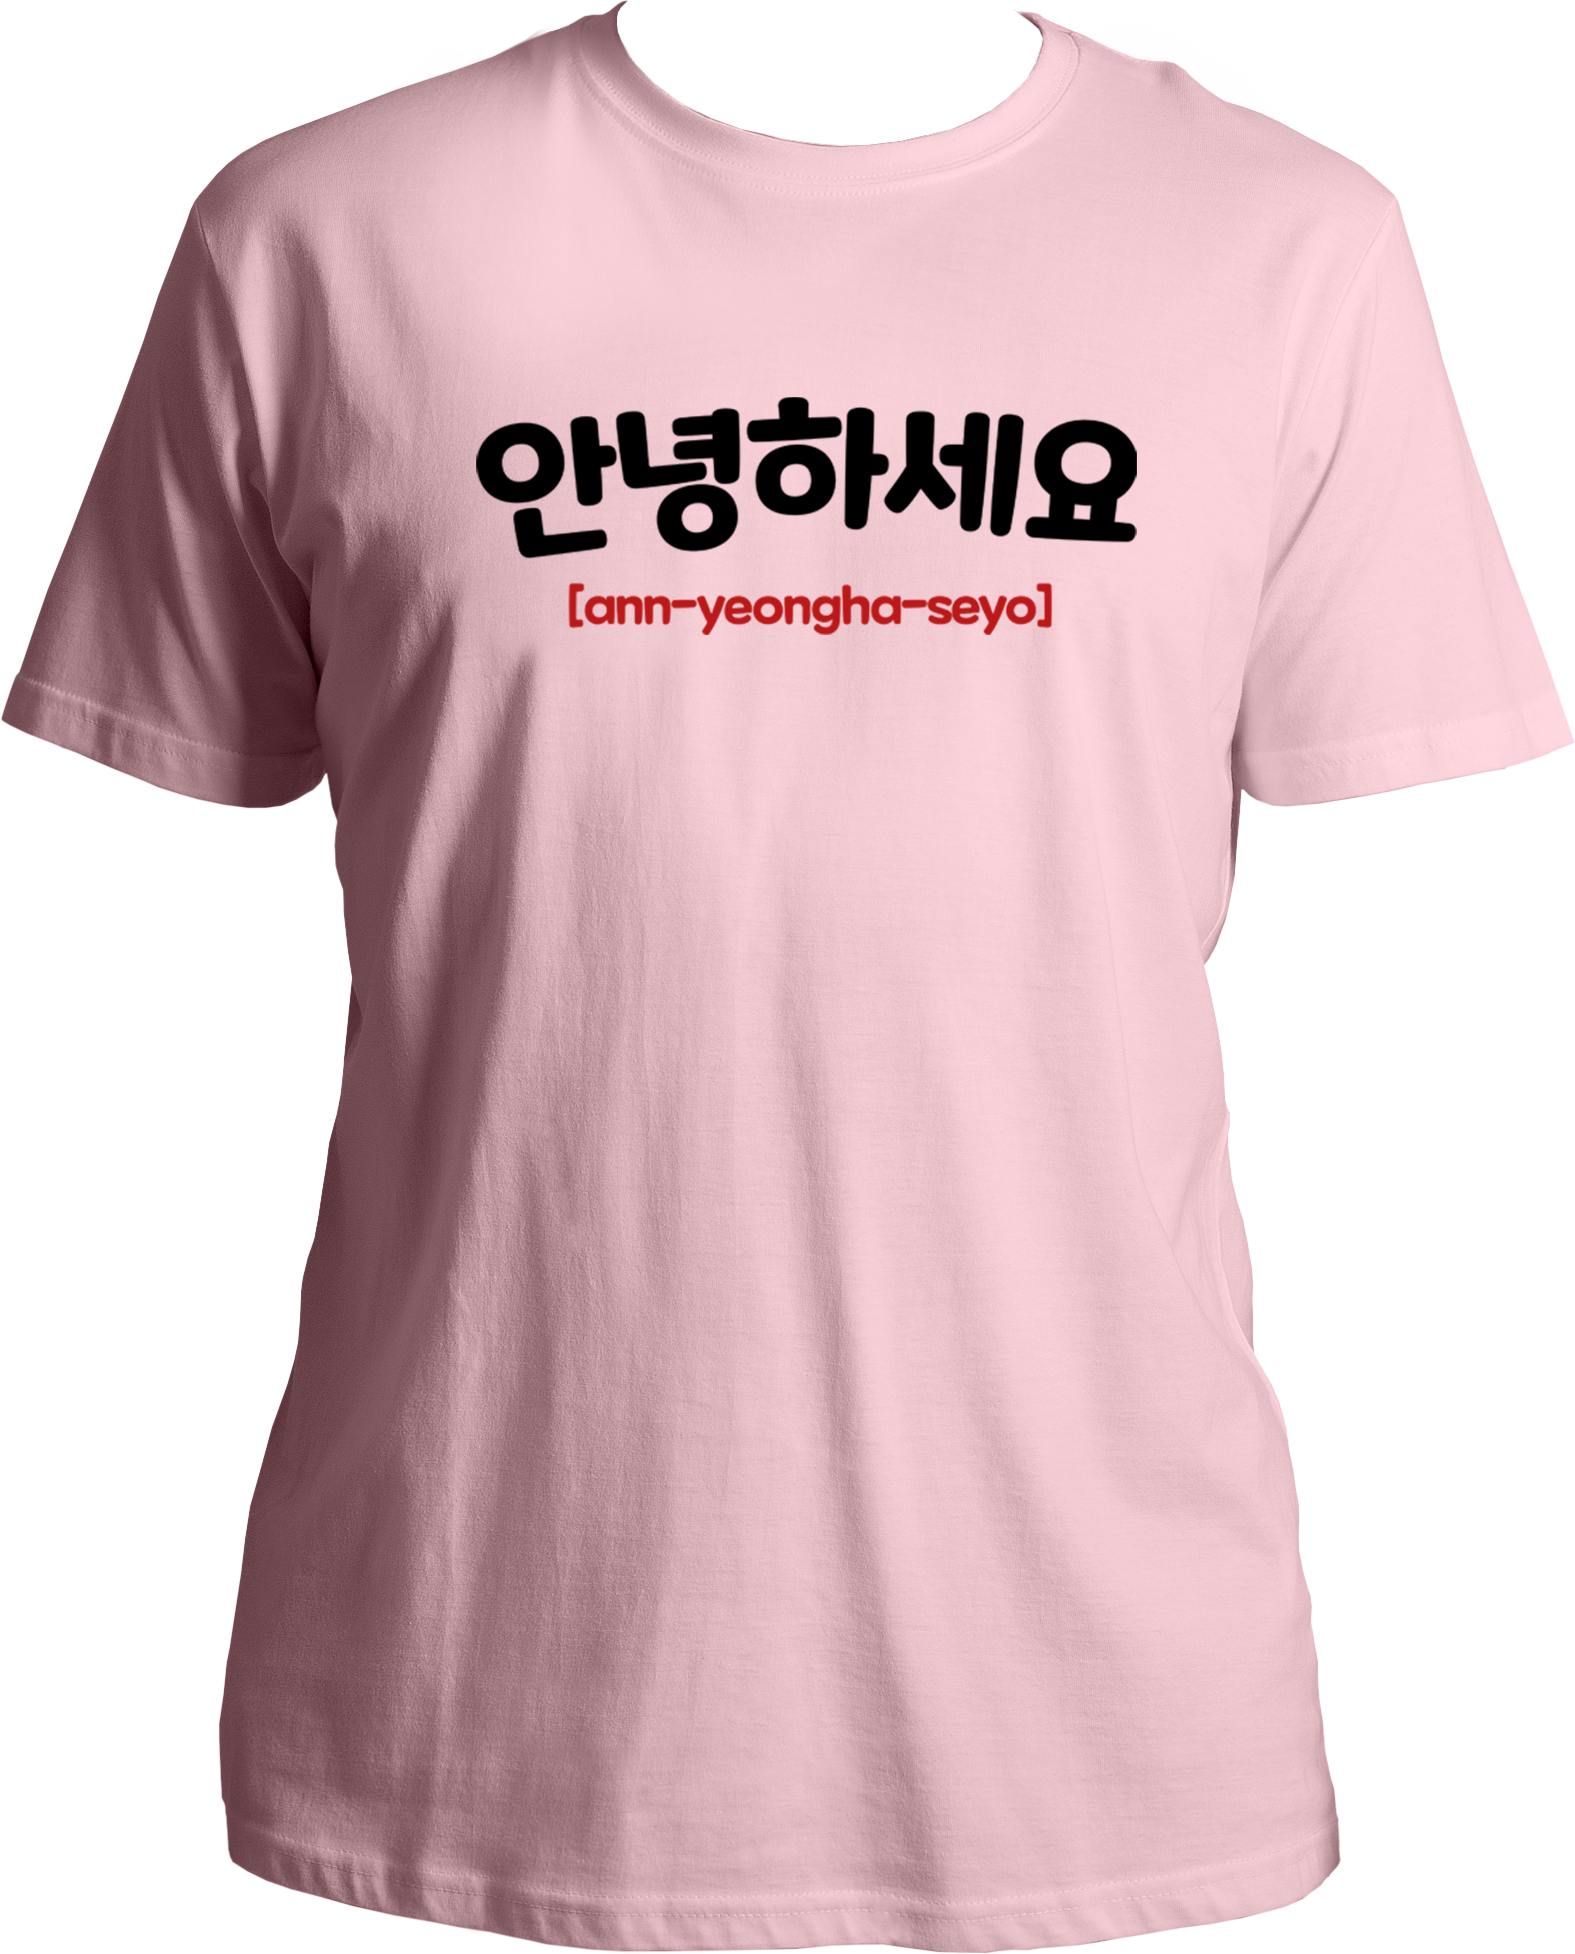 "Get your K-pop on in style with our "Annyeonghaseyo" tee! Say hello in Korean while showing off your love for Korean culture and music. Perfect for any kpop fan, this unisex t-shirt is truly fabulous. (Korean language not required, but a love for all things Korean is a must!)